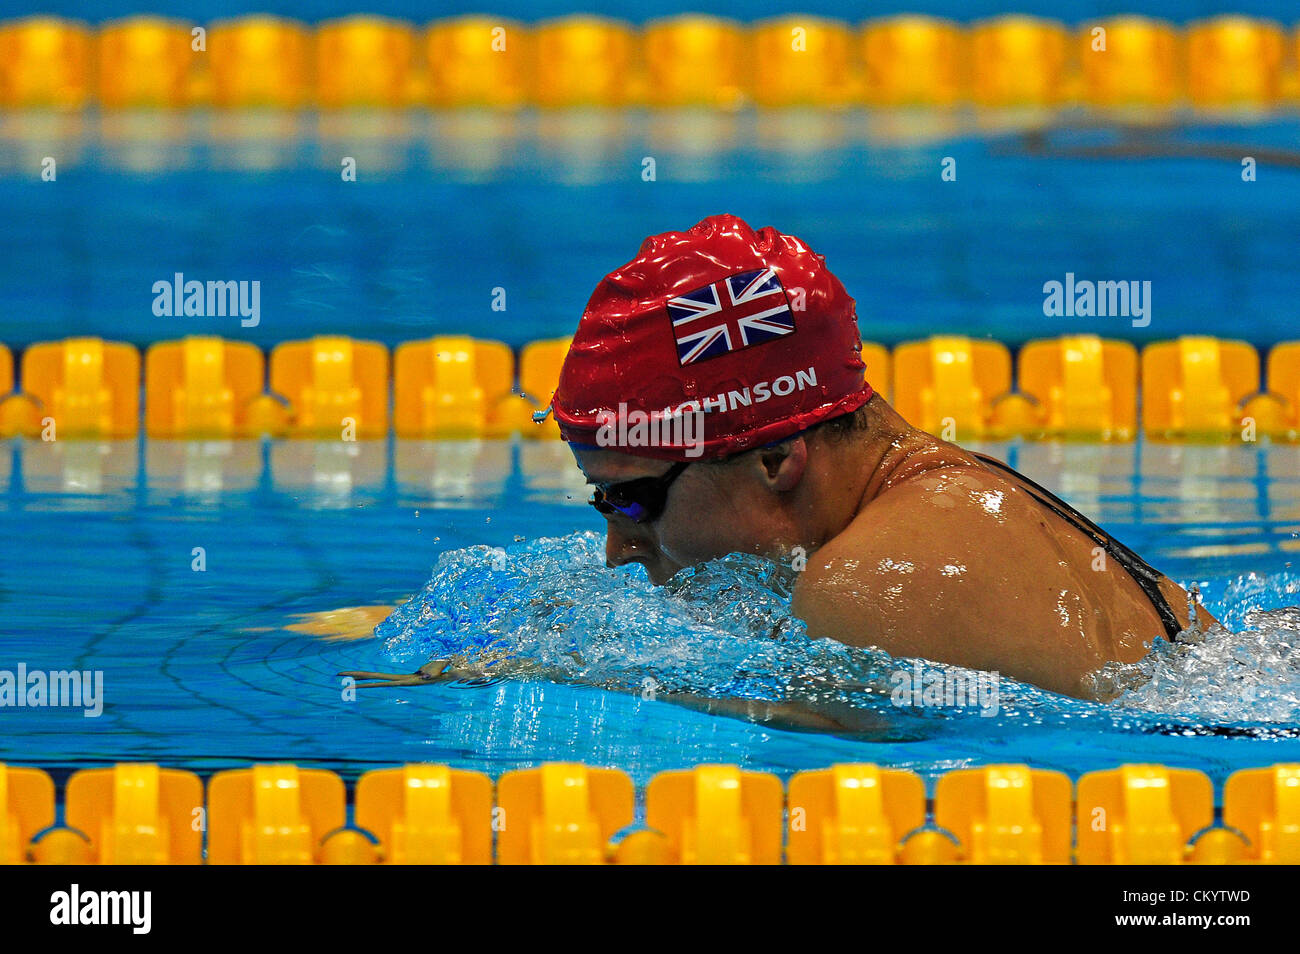 Stratford, London, UK. 5th September 2012. Elizabeth Johnson of Great Britain in action during the Women's 100m Breaststroke SB6 on day 7 of the London 2012 Paralympic Games at the Aquatic Centre. Credit:  Action Plus Sports Images / Alamy Live News Stock Photo